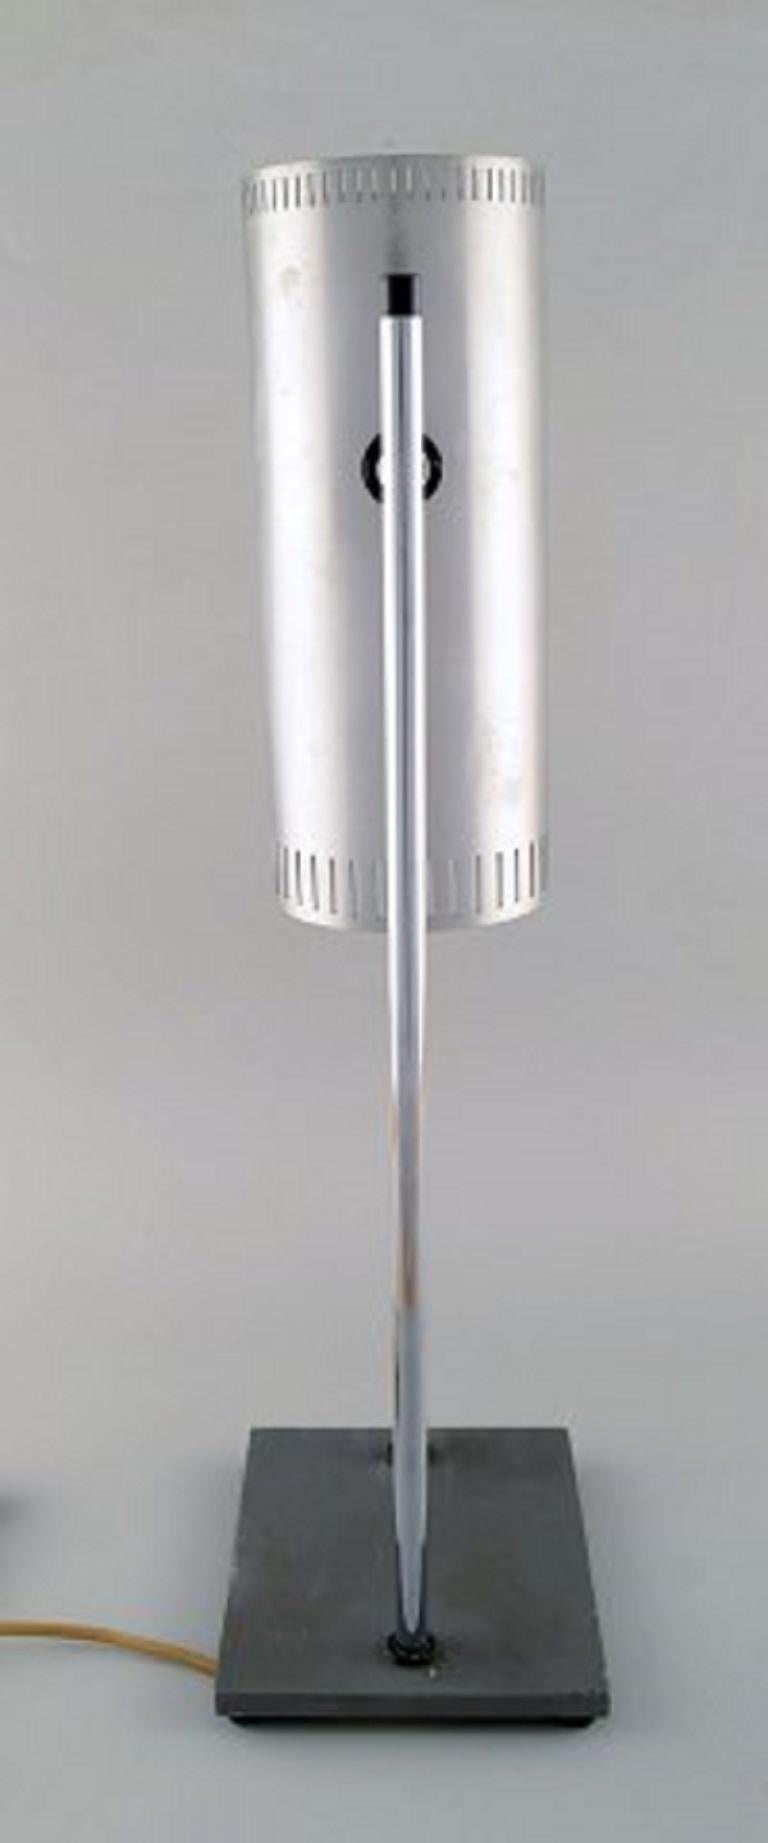 Jo Hammerborg for Fog & Mørup. Trombone table lamp in chromed and polished steel with adjustable shade, the base of gray lacquered metal, 1960s-1970s.
Measures: 56 x 17.5 cm.
In good condition with signs of use.